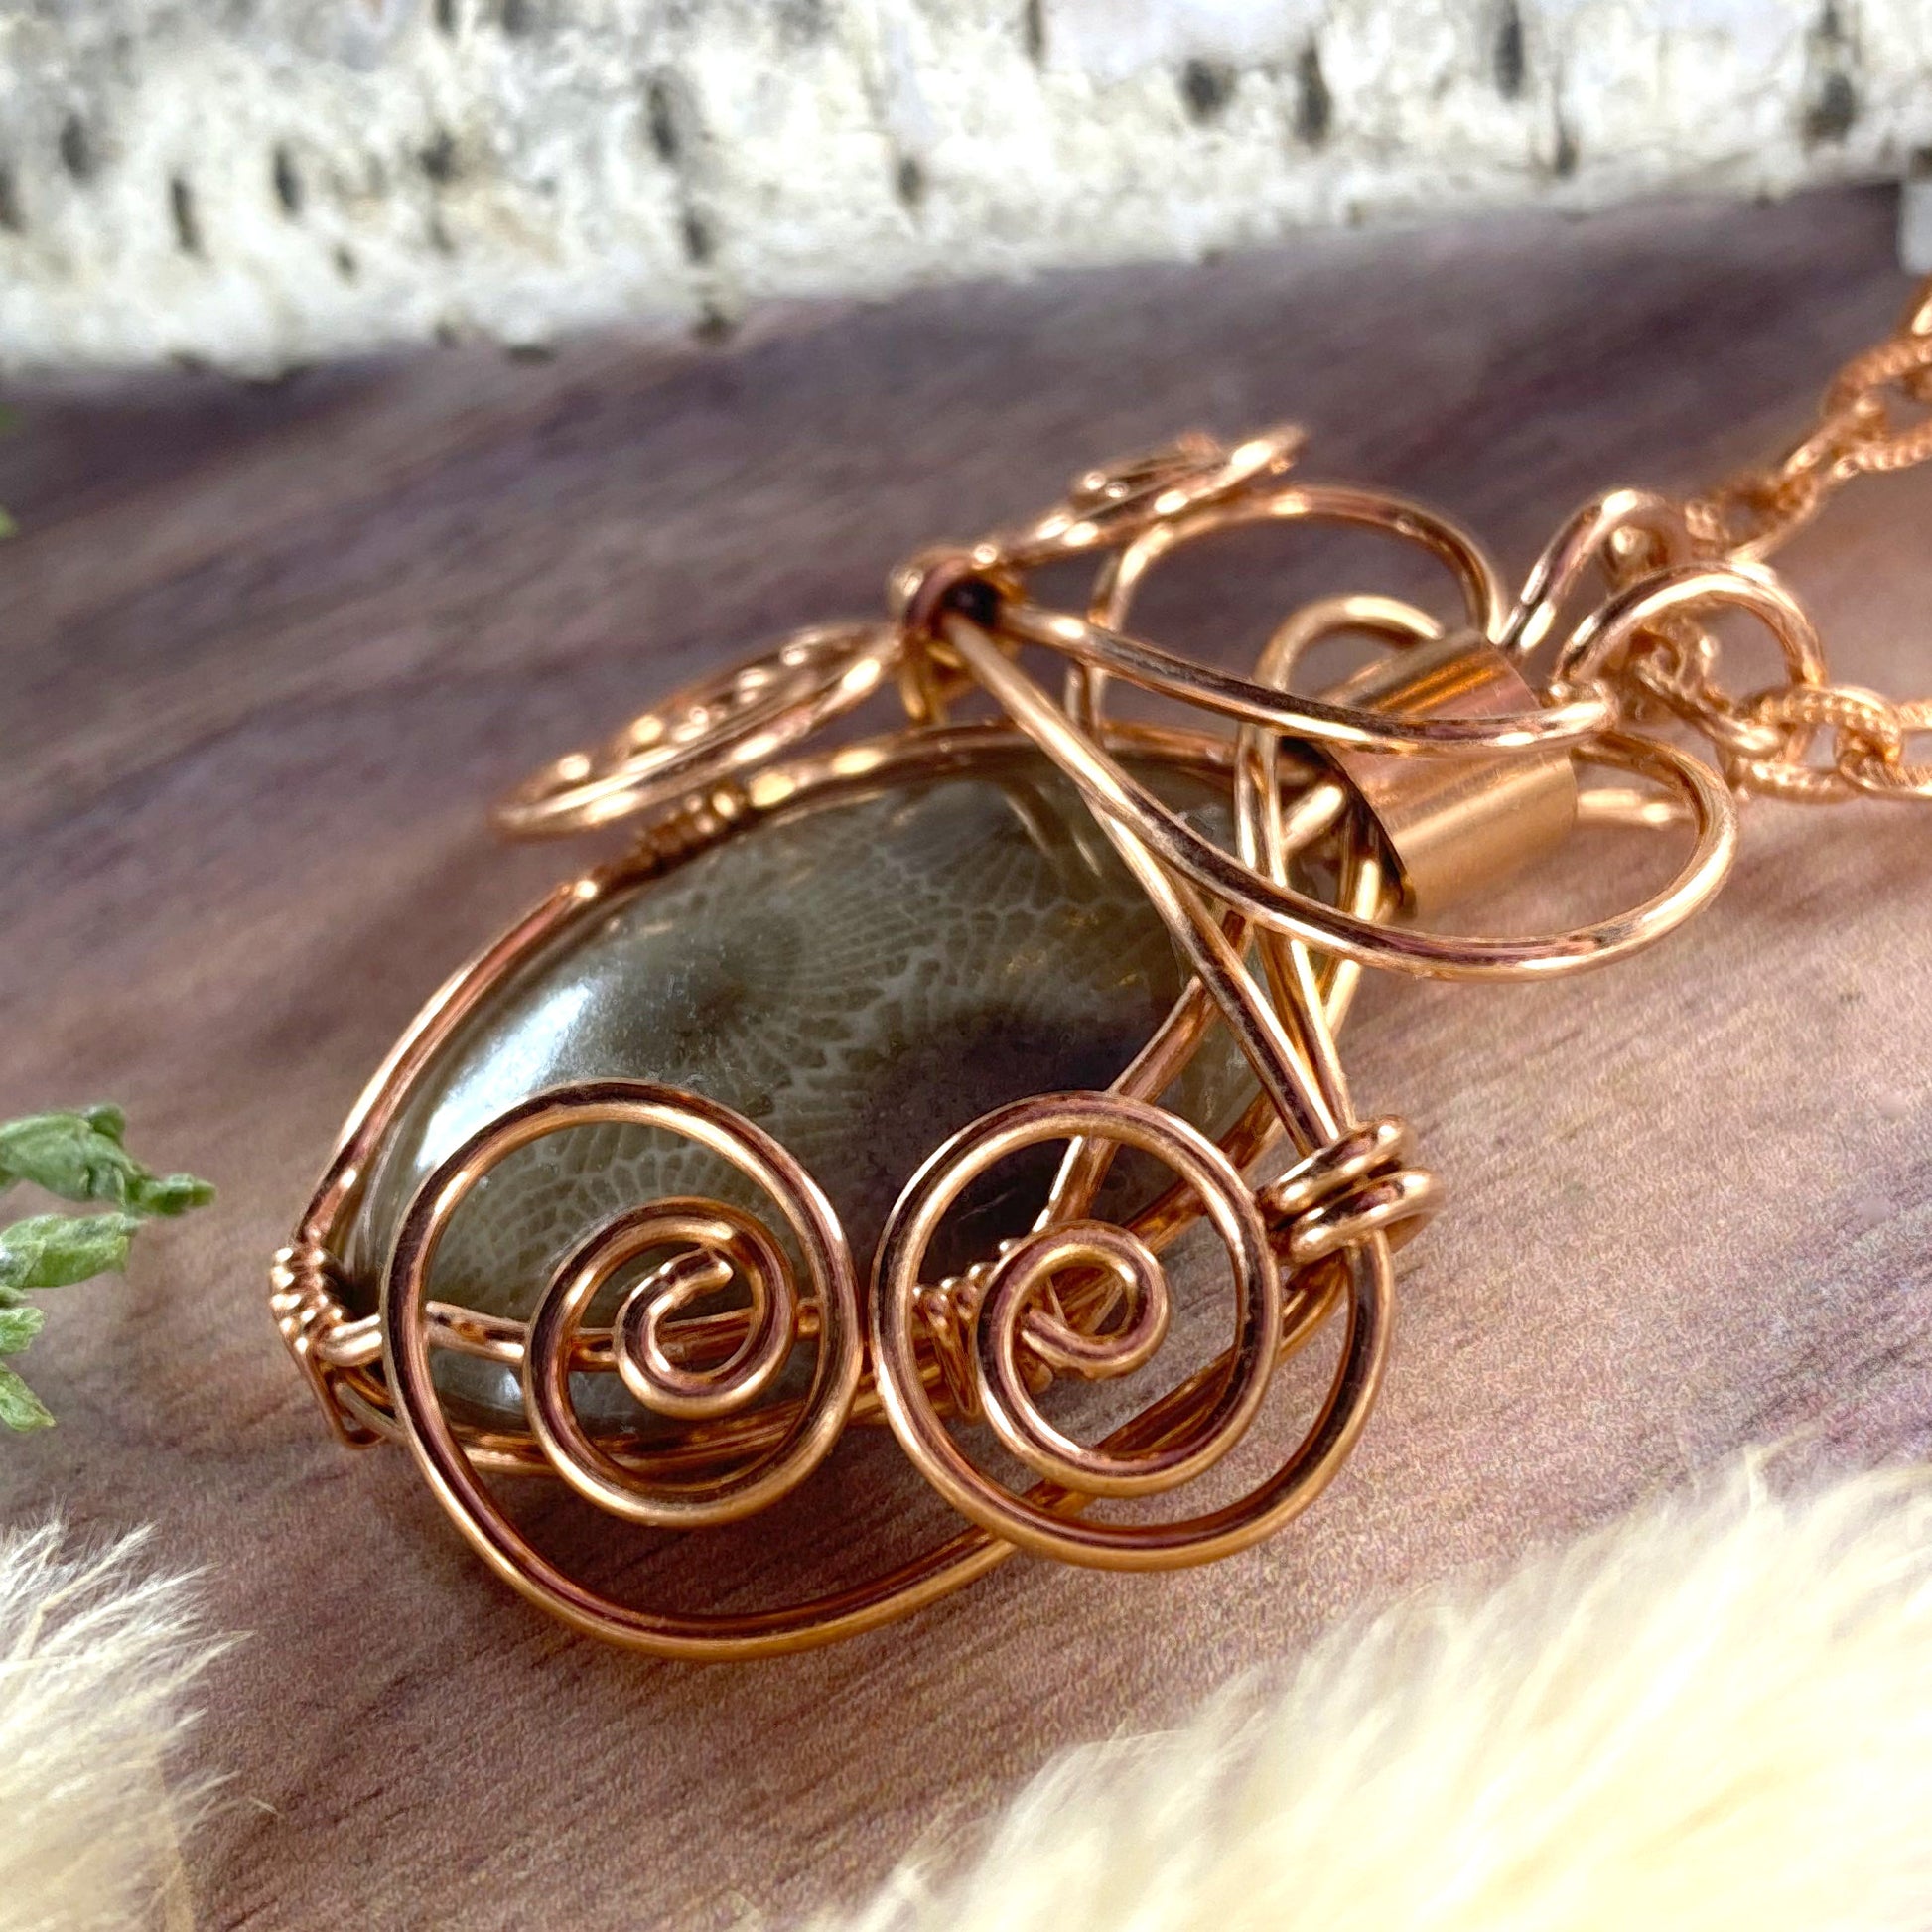 Petoskey Stone Wire-Wrapped Necklace Front View III - Stone Treasures by the Lake